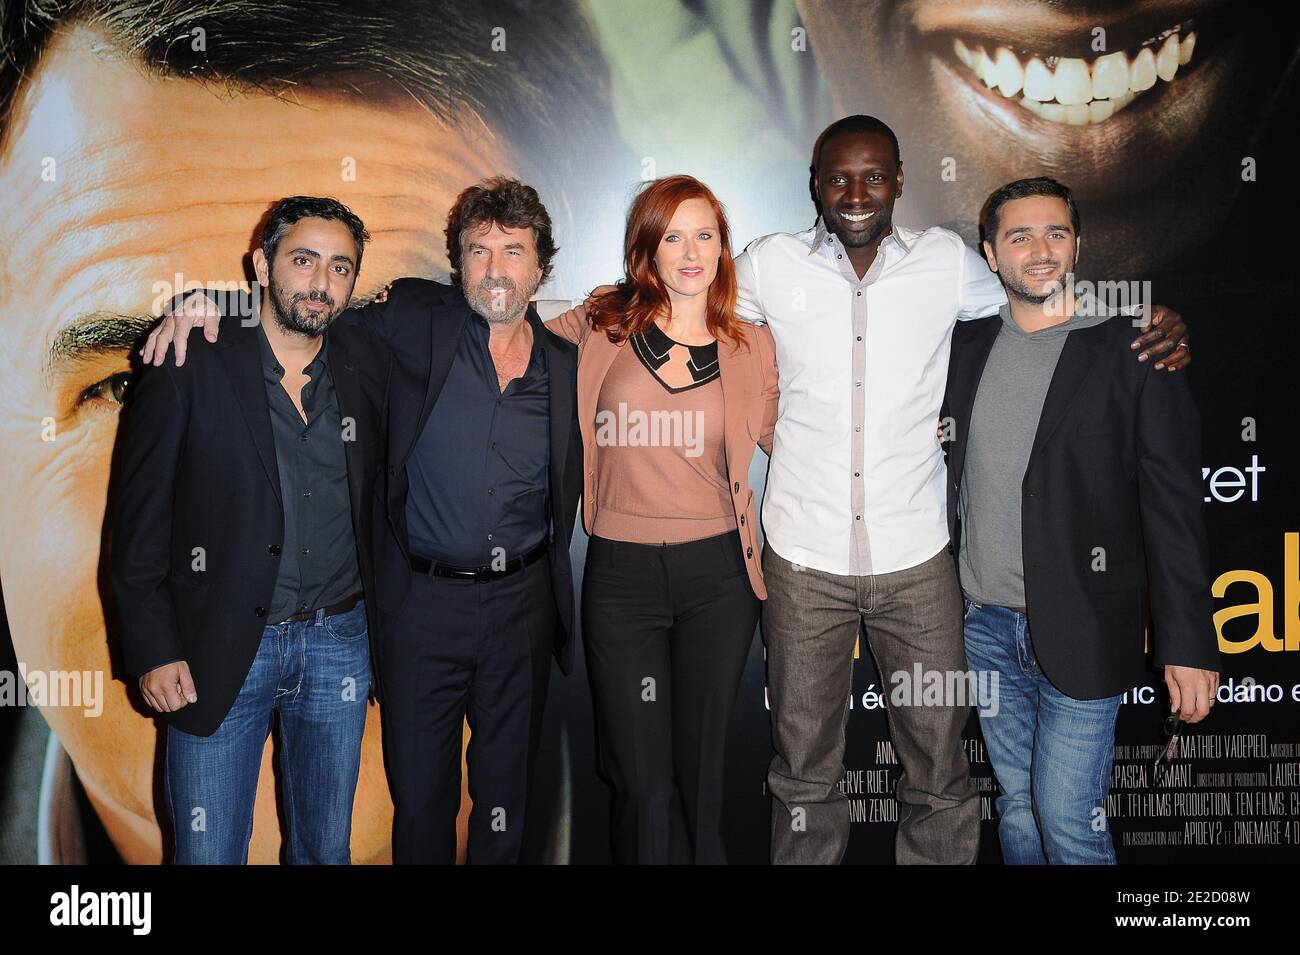 Eric Toledano, Francois Cluzet, Audrey Fleurot, Omar Sy and Olivier Nakache attending the Premiere of 'Intouchables' held at Cinema Gaumont Marignan in Paris, France on October 18, 2011. Photo by Nicolas Briquet/ABACAPRESS.COM Stock Photo